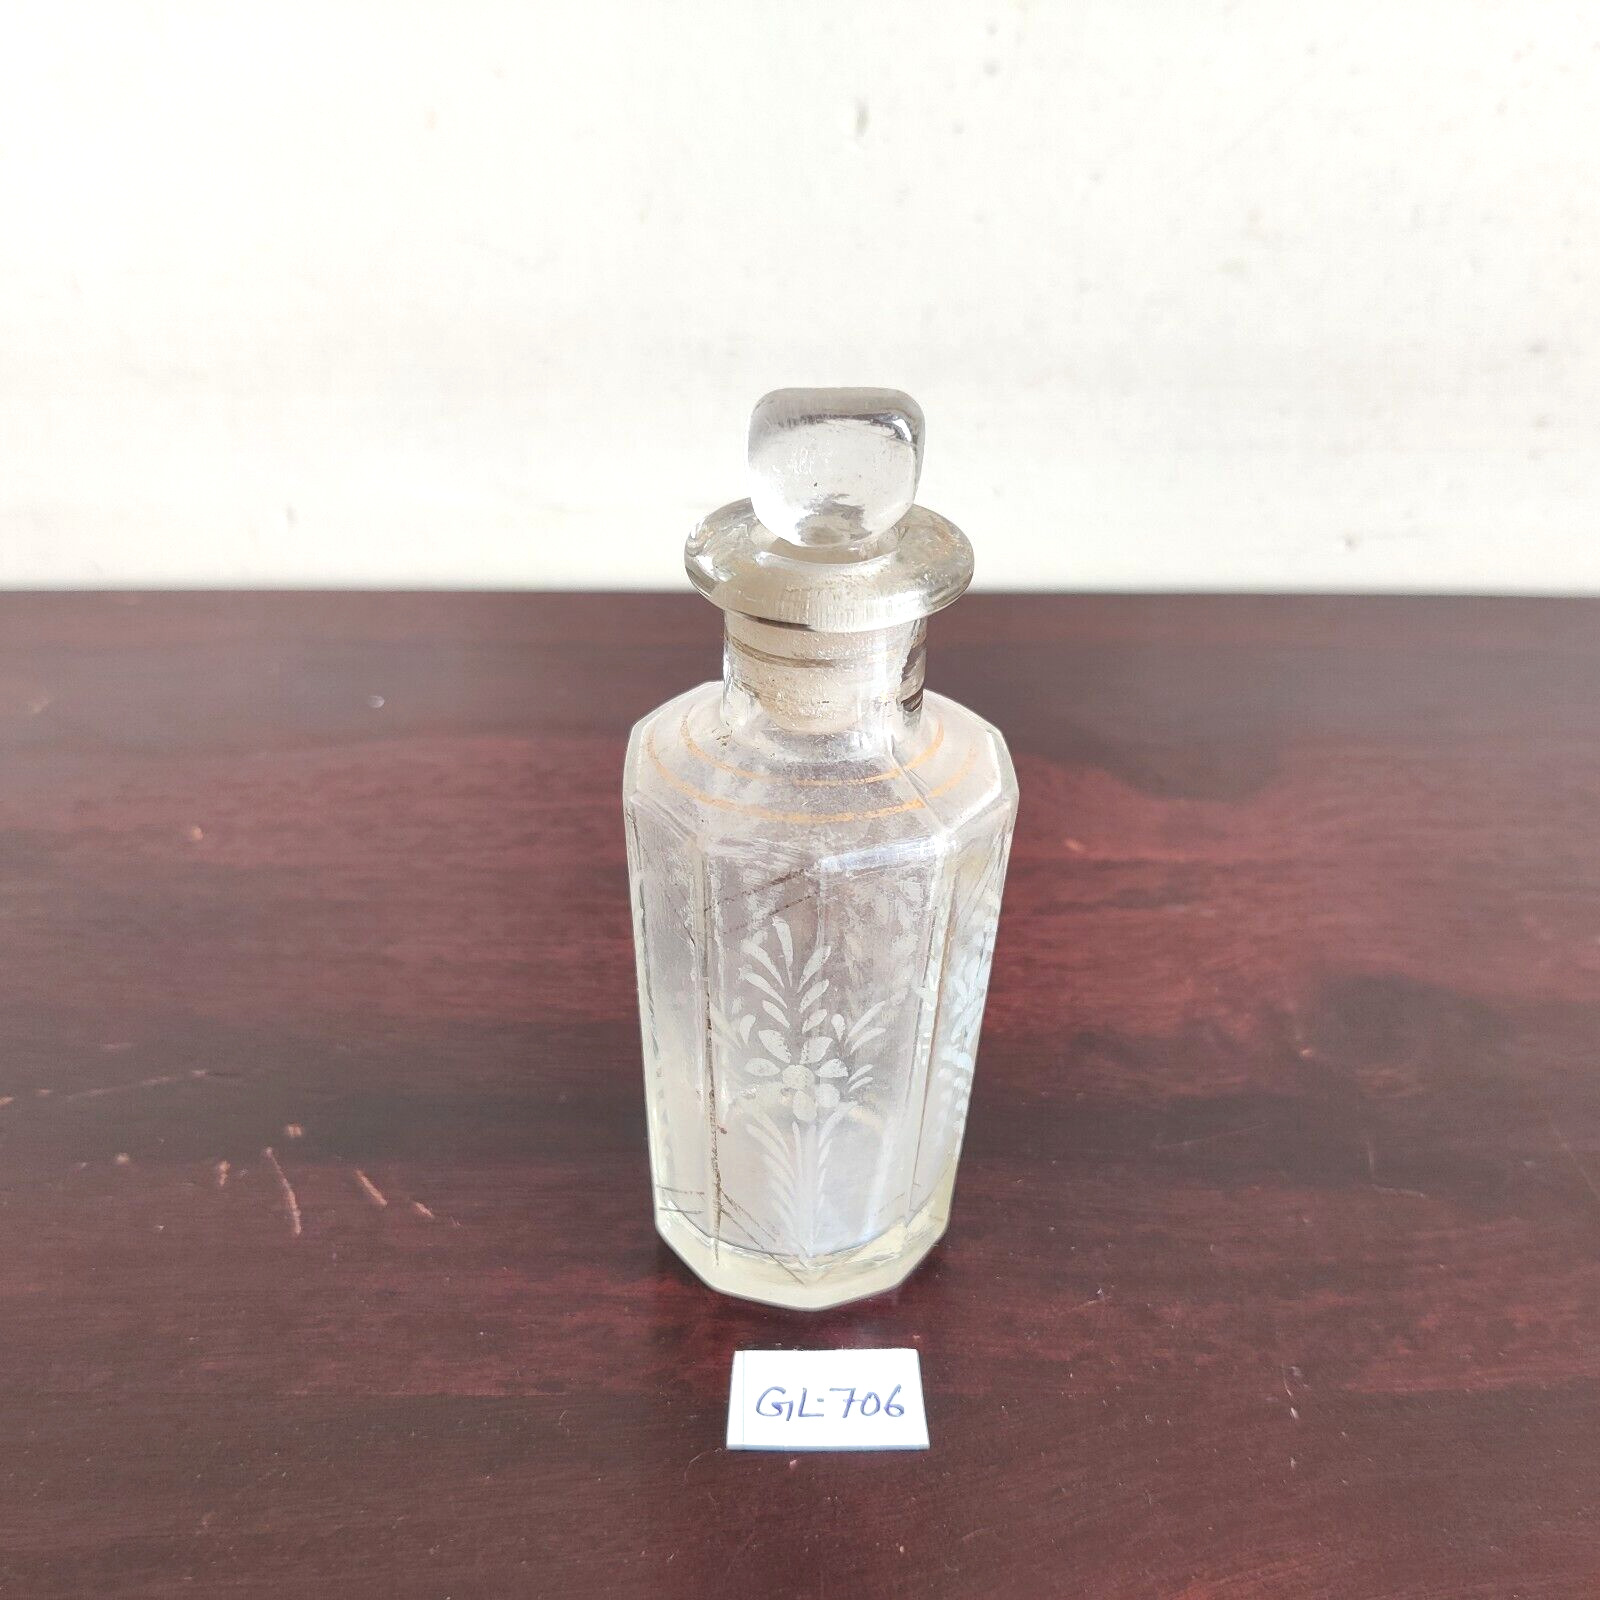 Vintage Clear Glass Floral Perfume Bottle Decorative Glassware Collectible GL706